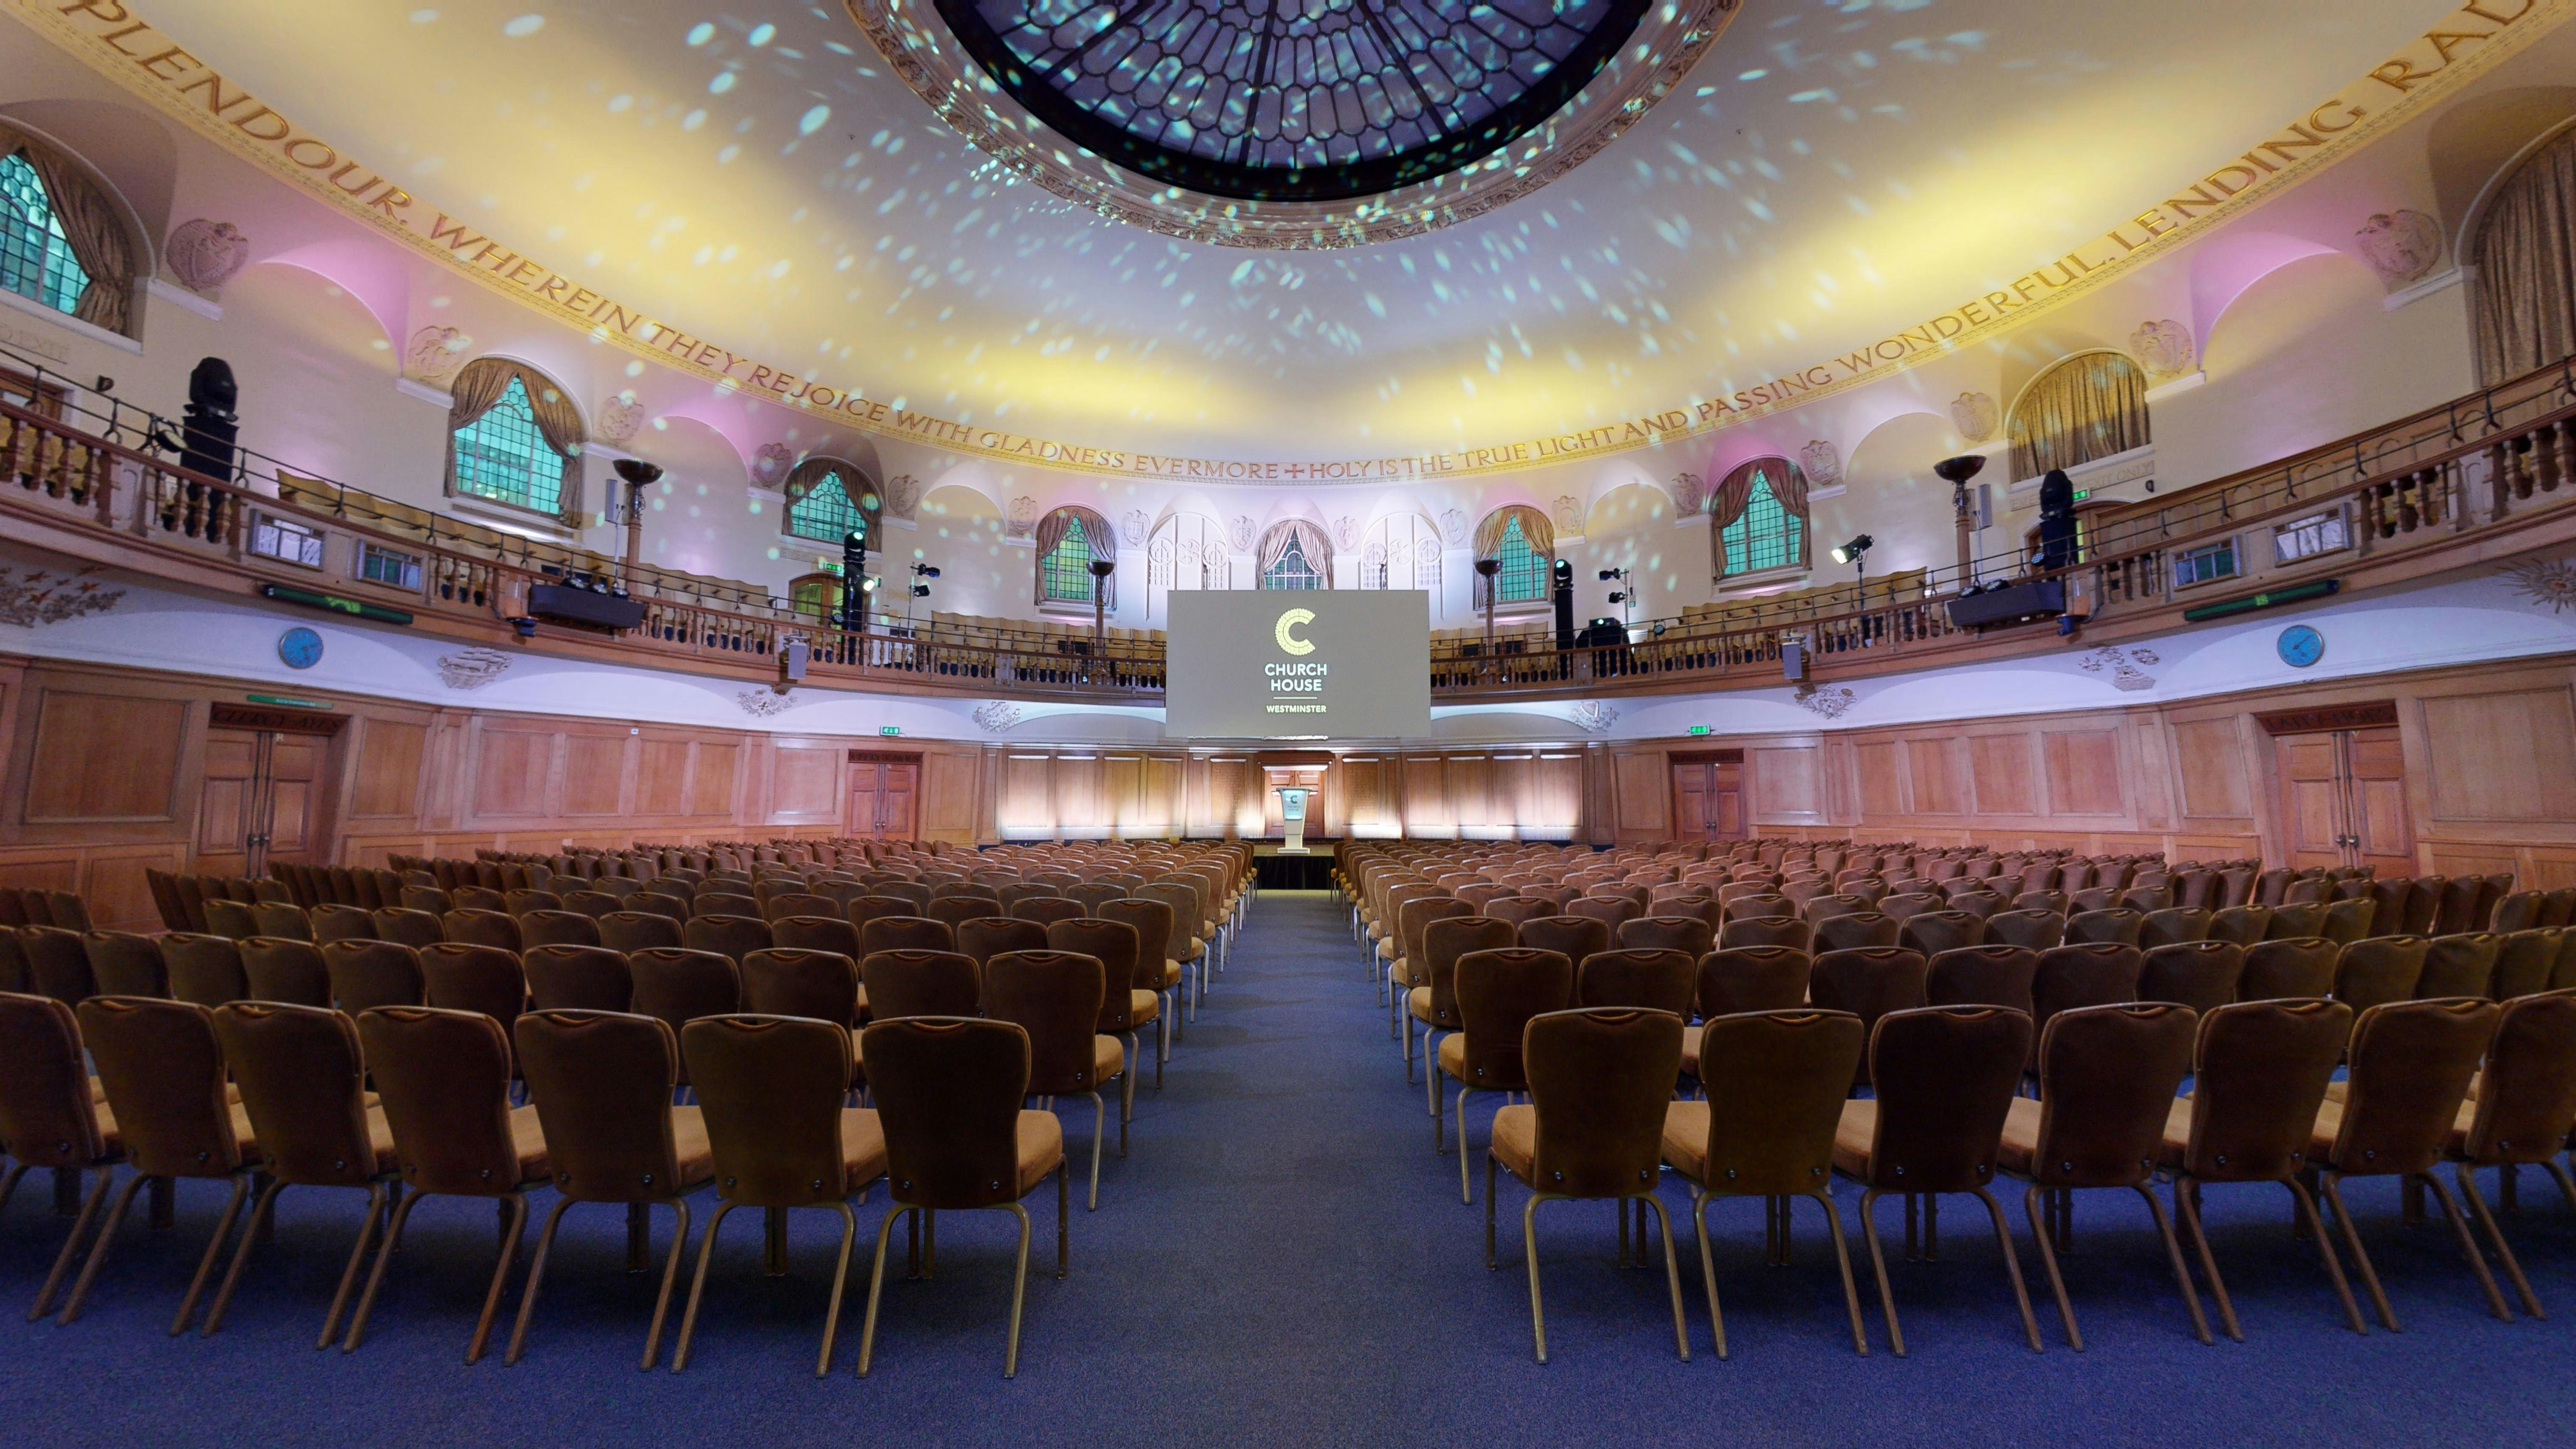 North West London Venue Hire - Church House Westminster